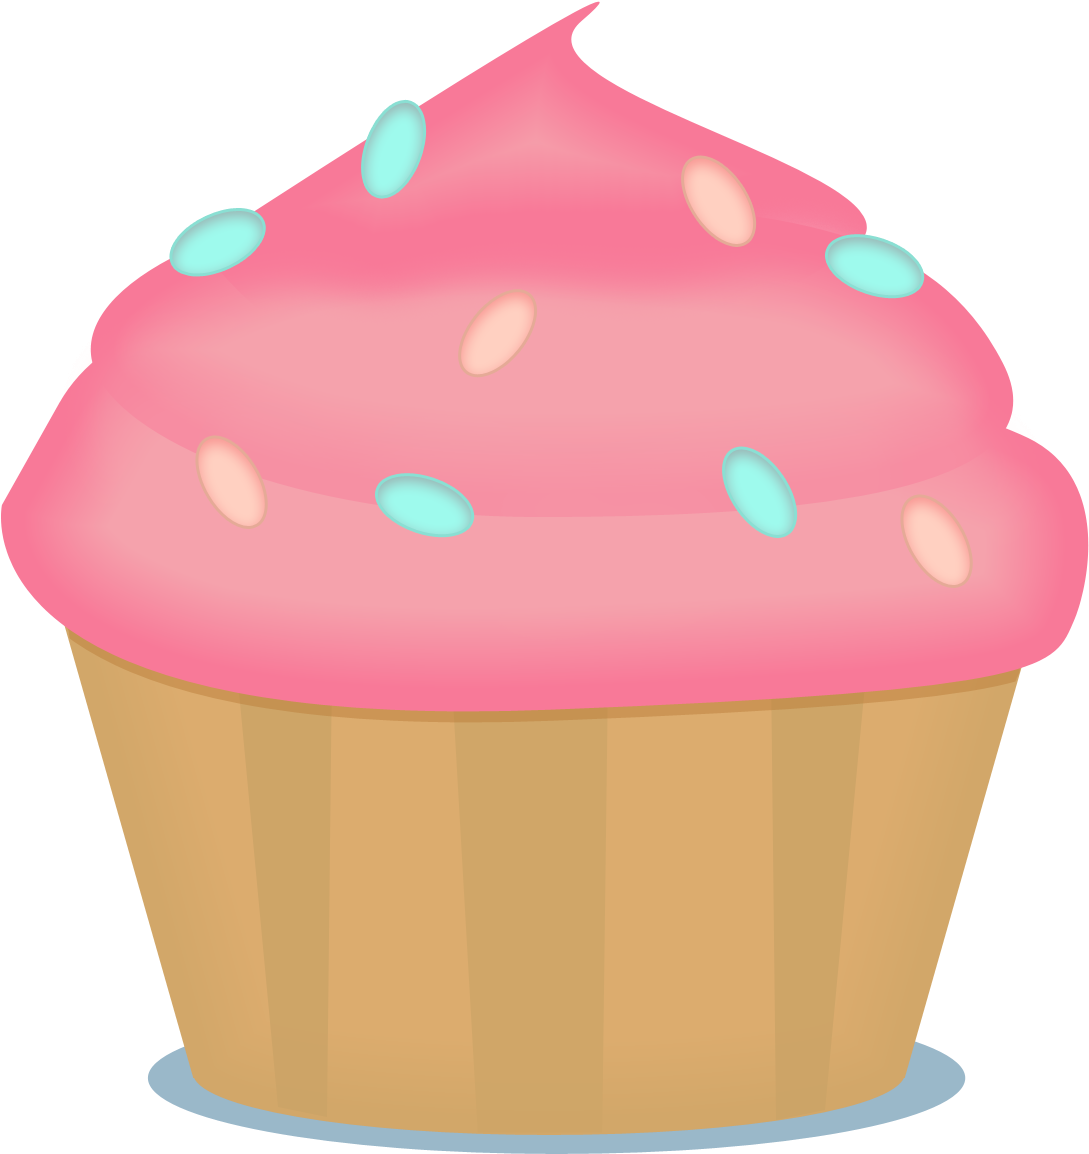 Muffin Clipart Baking Muffin - Clip Art Cake Sale - Png Download (1213x1213), Png Download